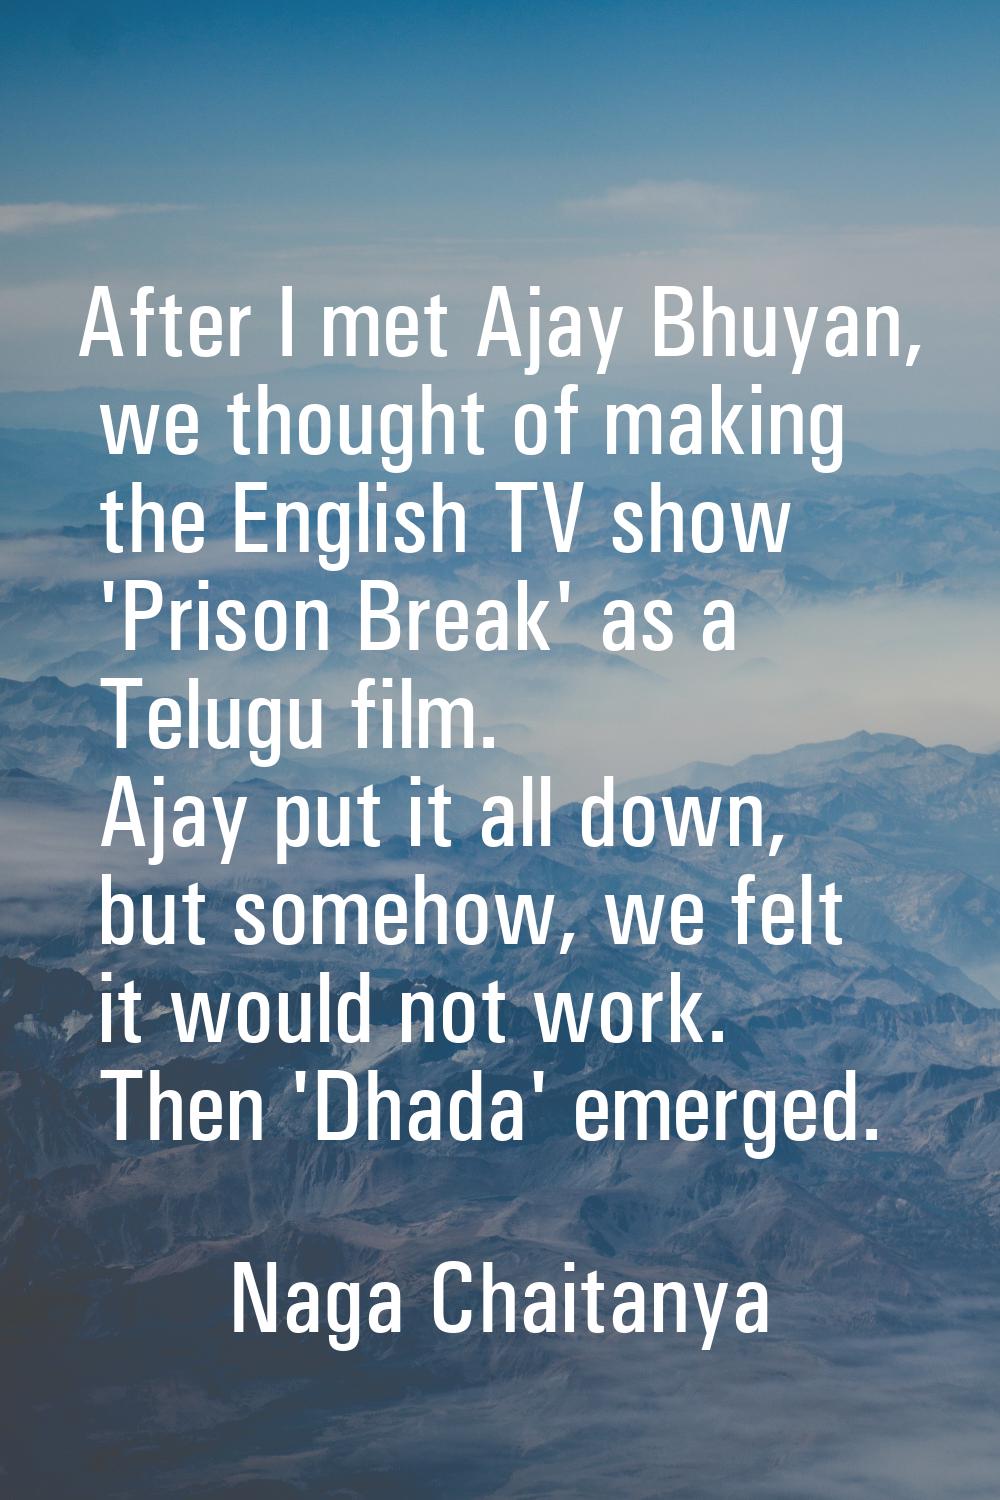 After I met Ajay Bhuyan, we thought of making the English TV show 'Prison Break' as a Telugu film. 